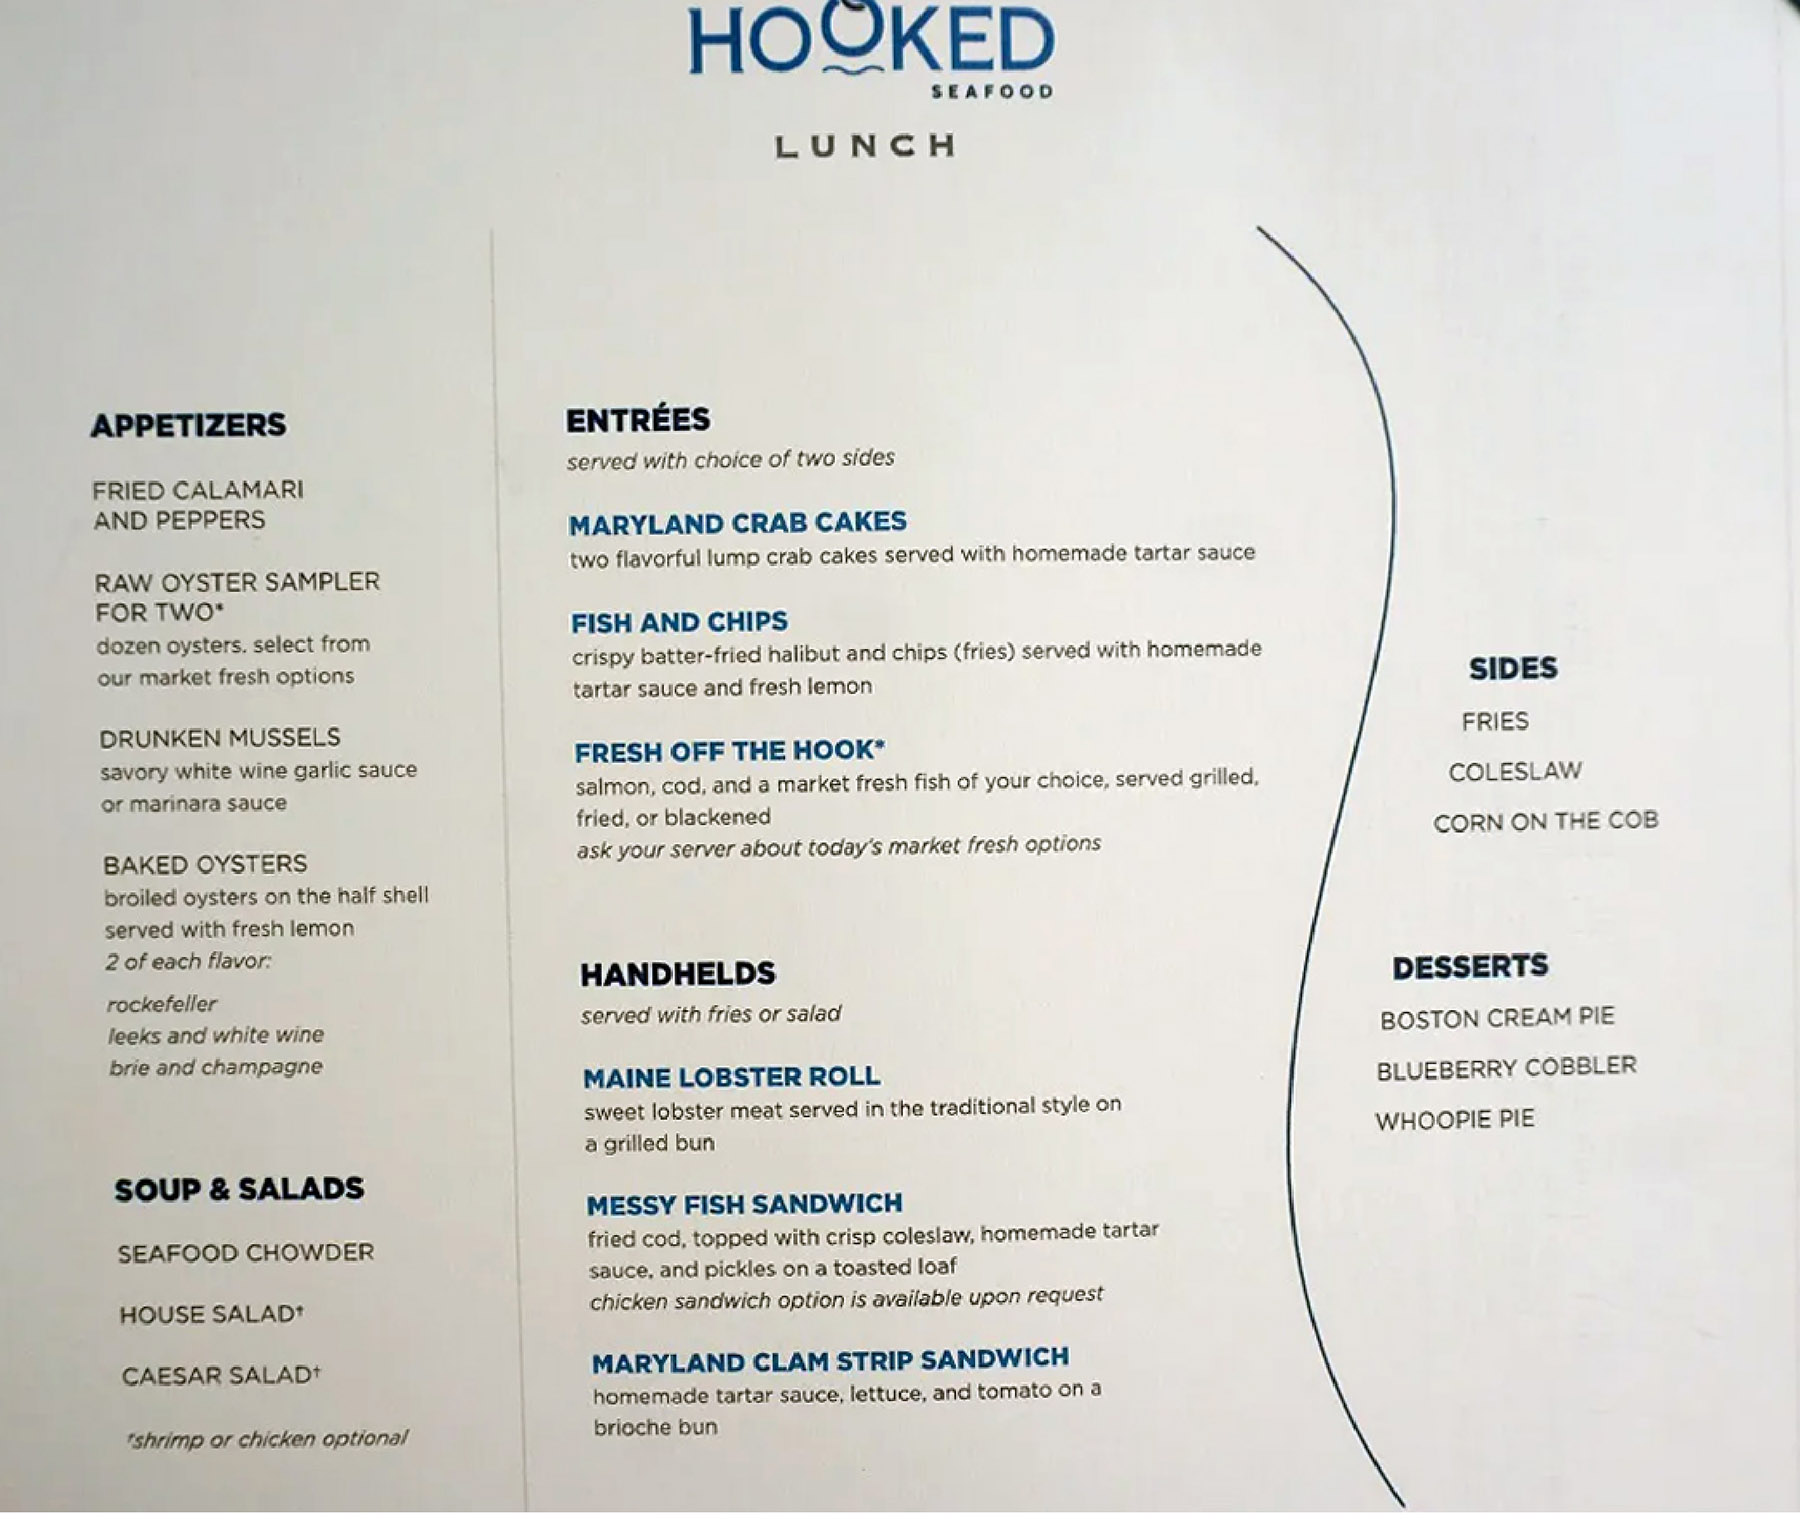 Royal Caribbean Hooked Seafood Lunch Menu page 1